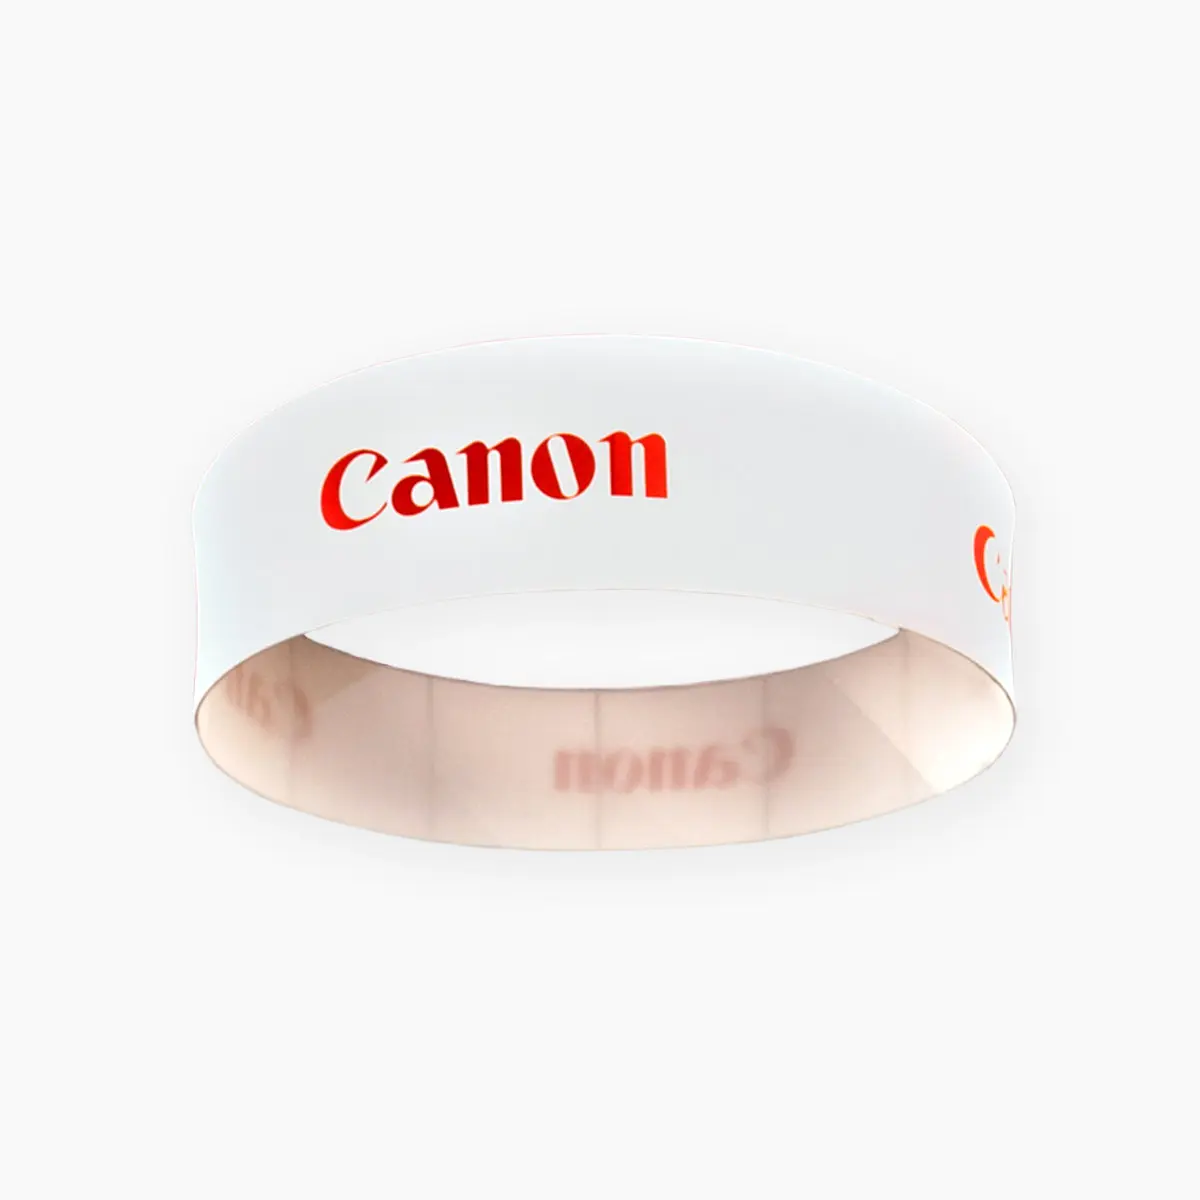 A hanging tradeshow display in white with Canon logo in red created for a major printing exposition.